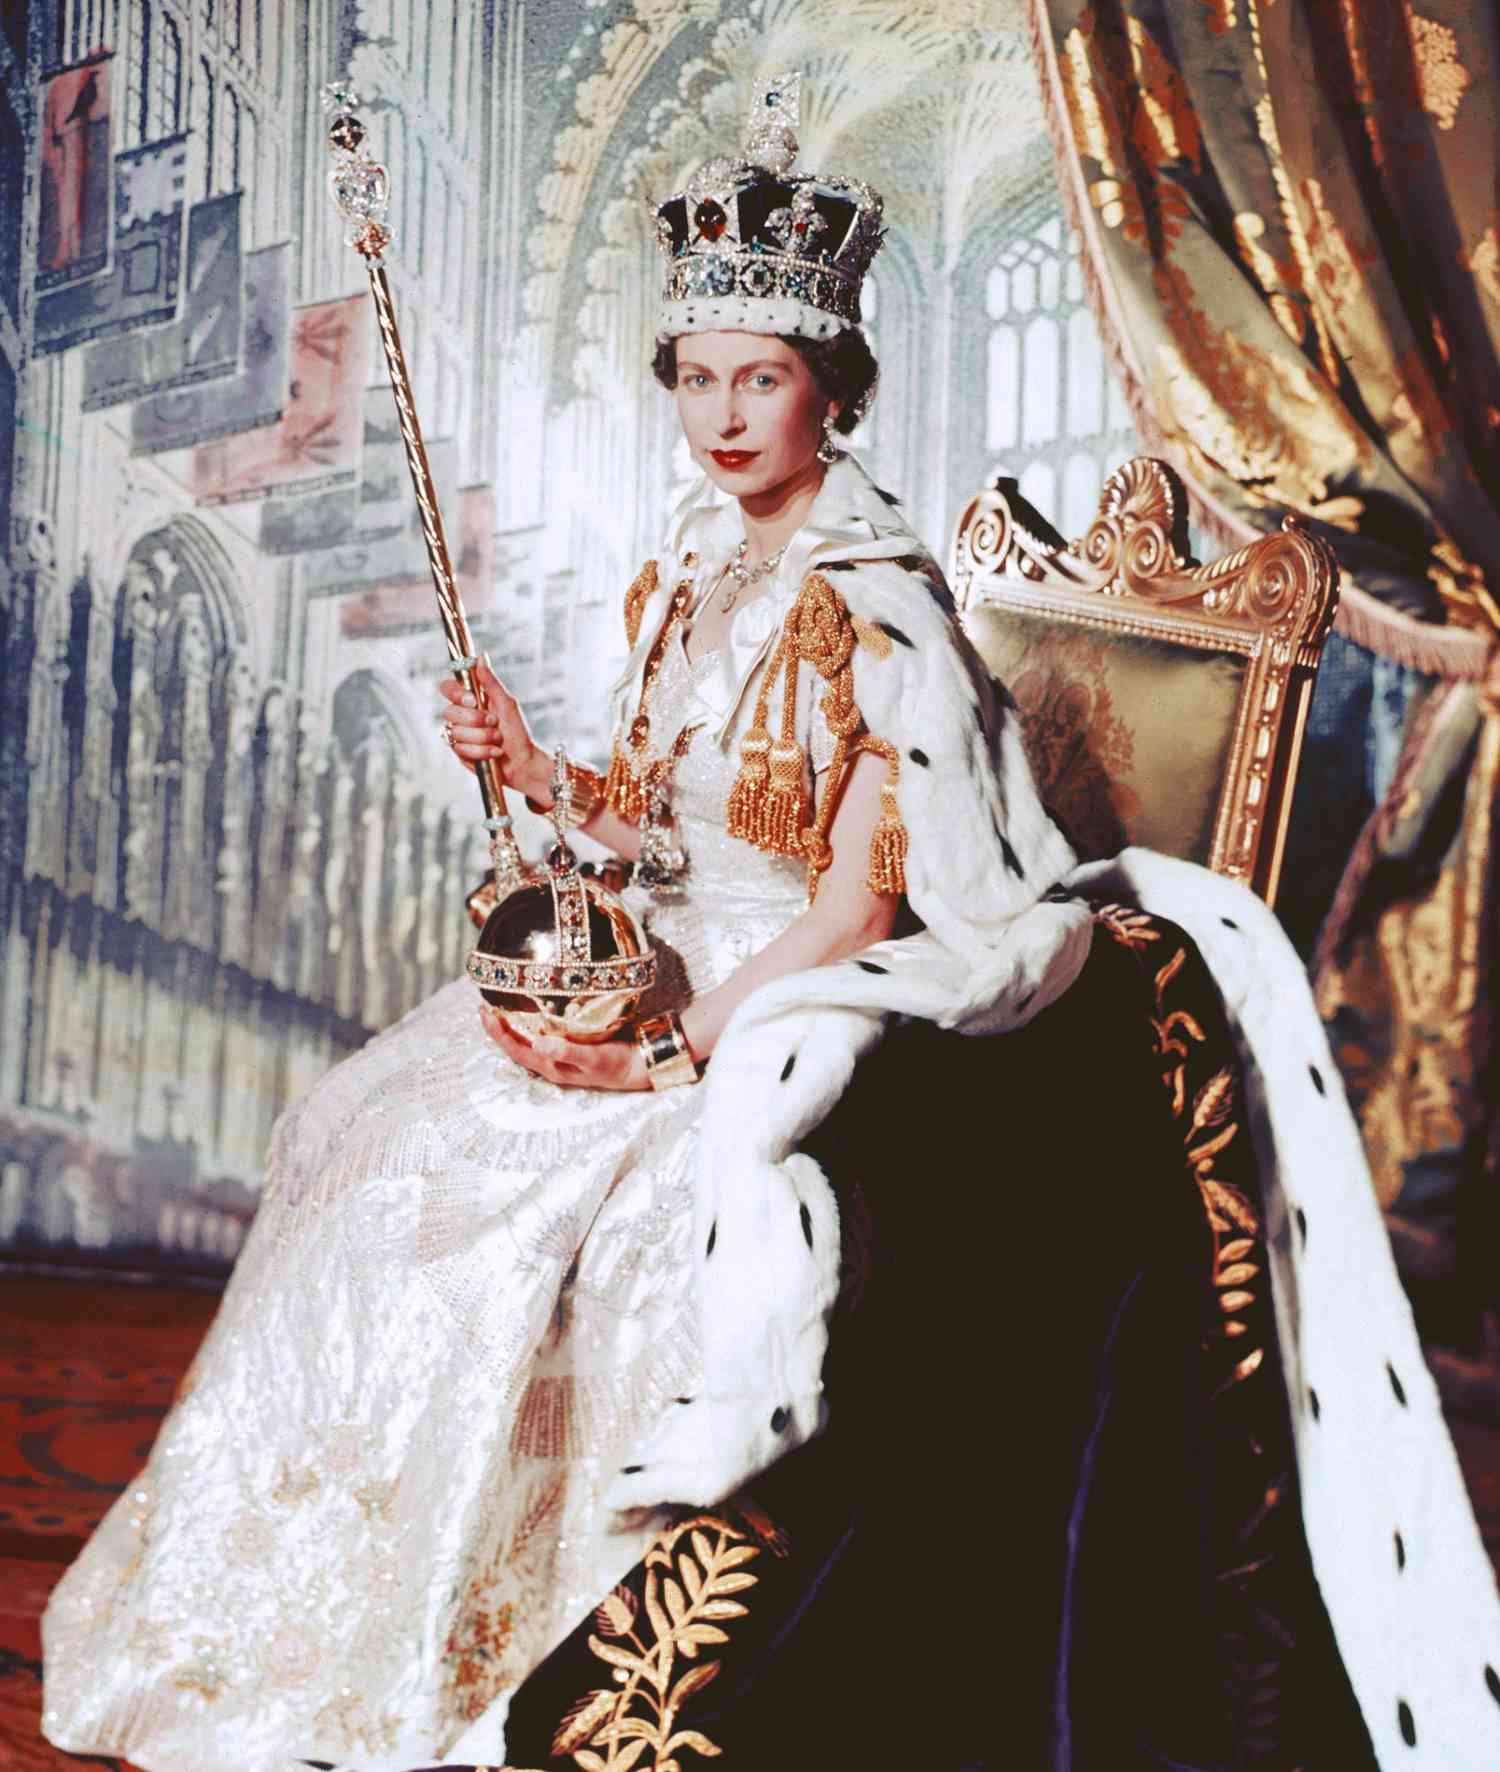 The Royal Family cover image